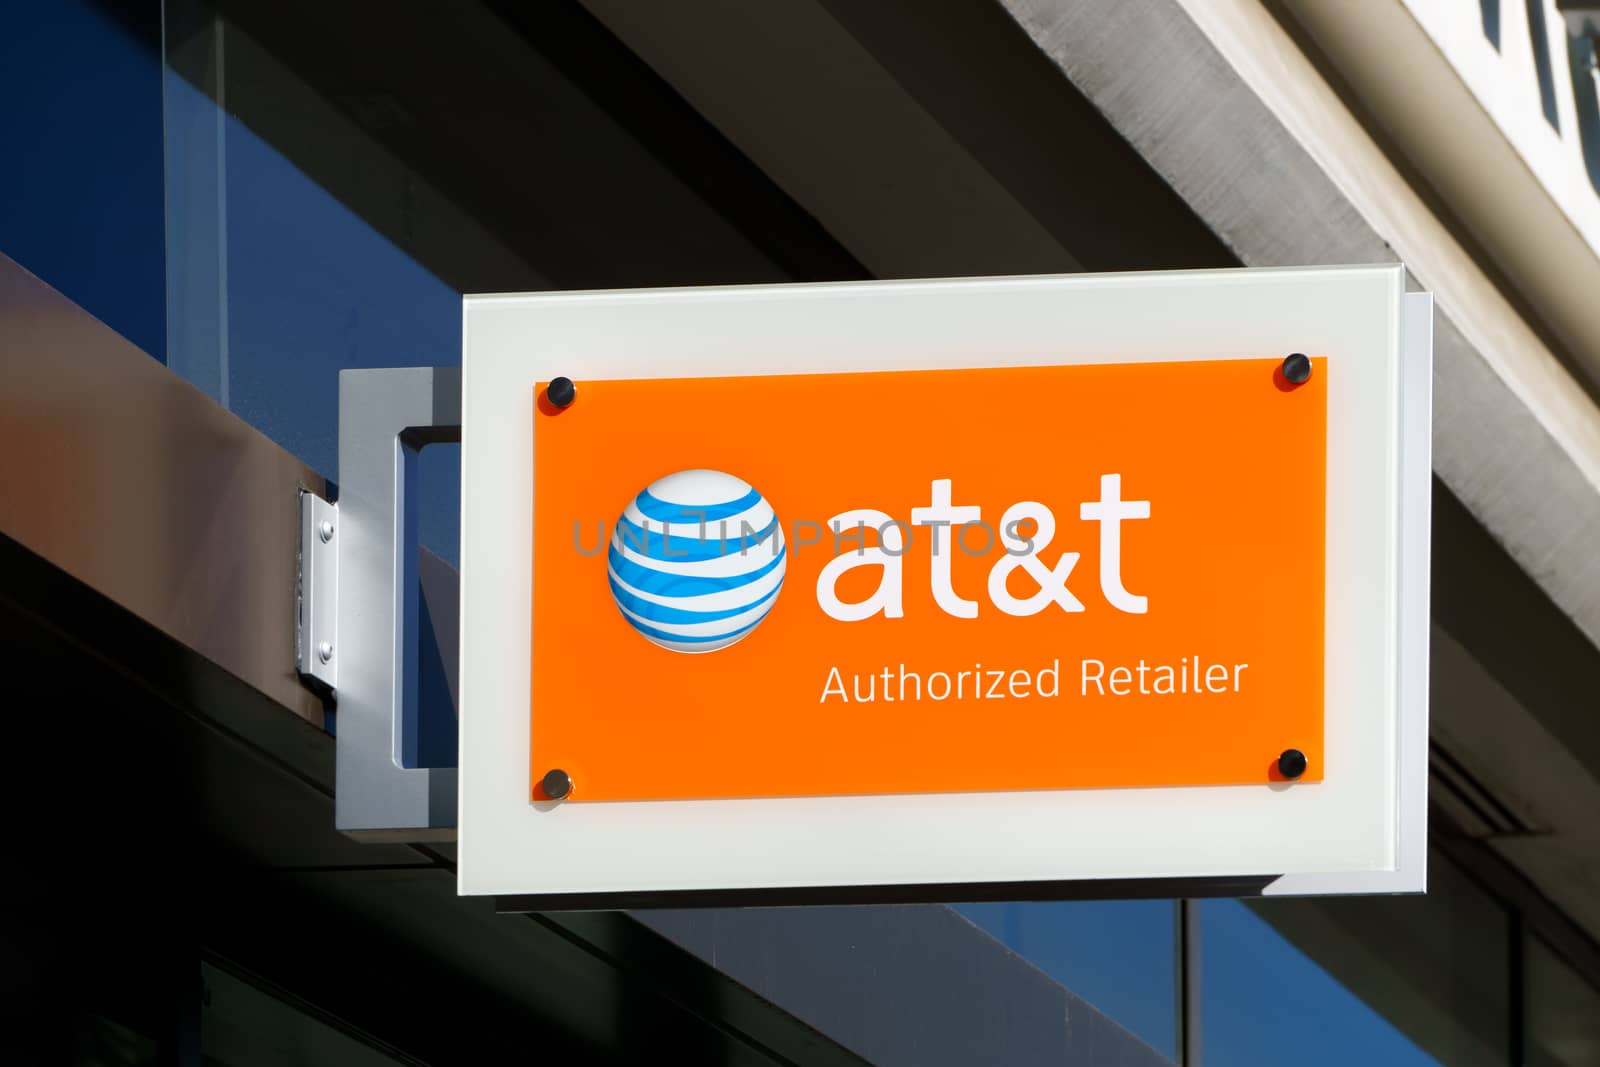 AT&T Authorized Retailer Store Exterior and Sign by wolterk